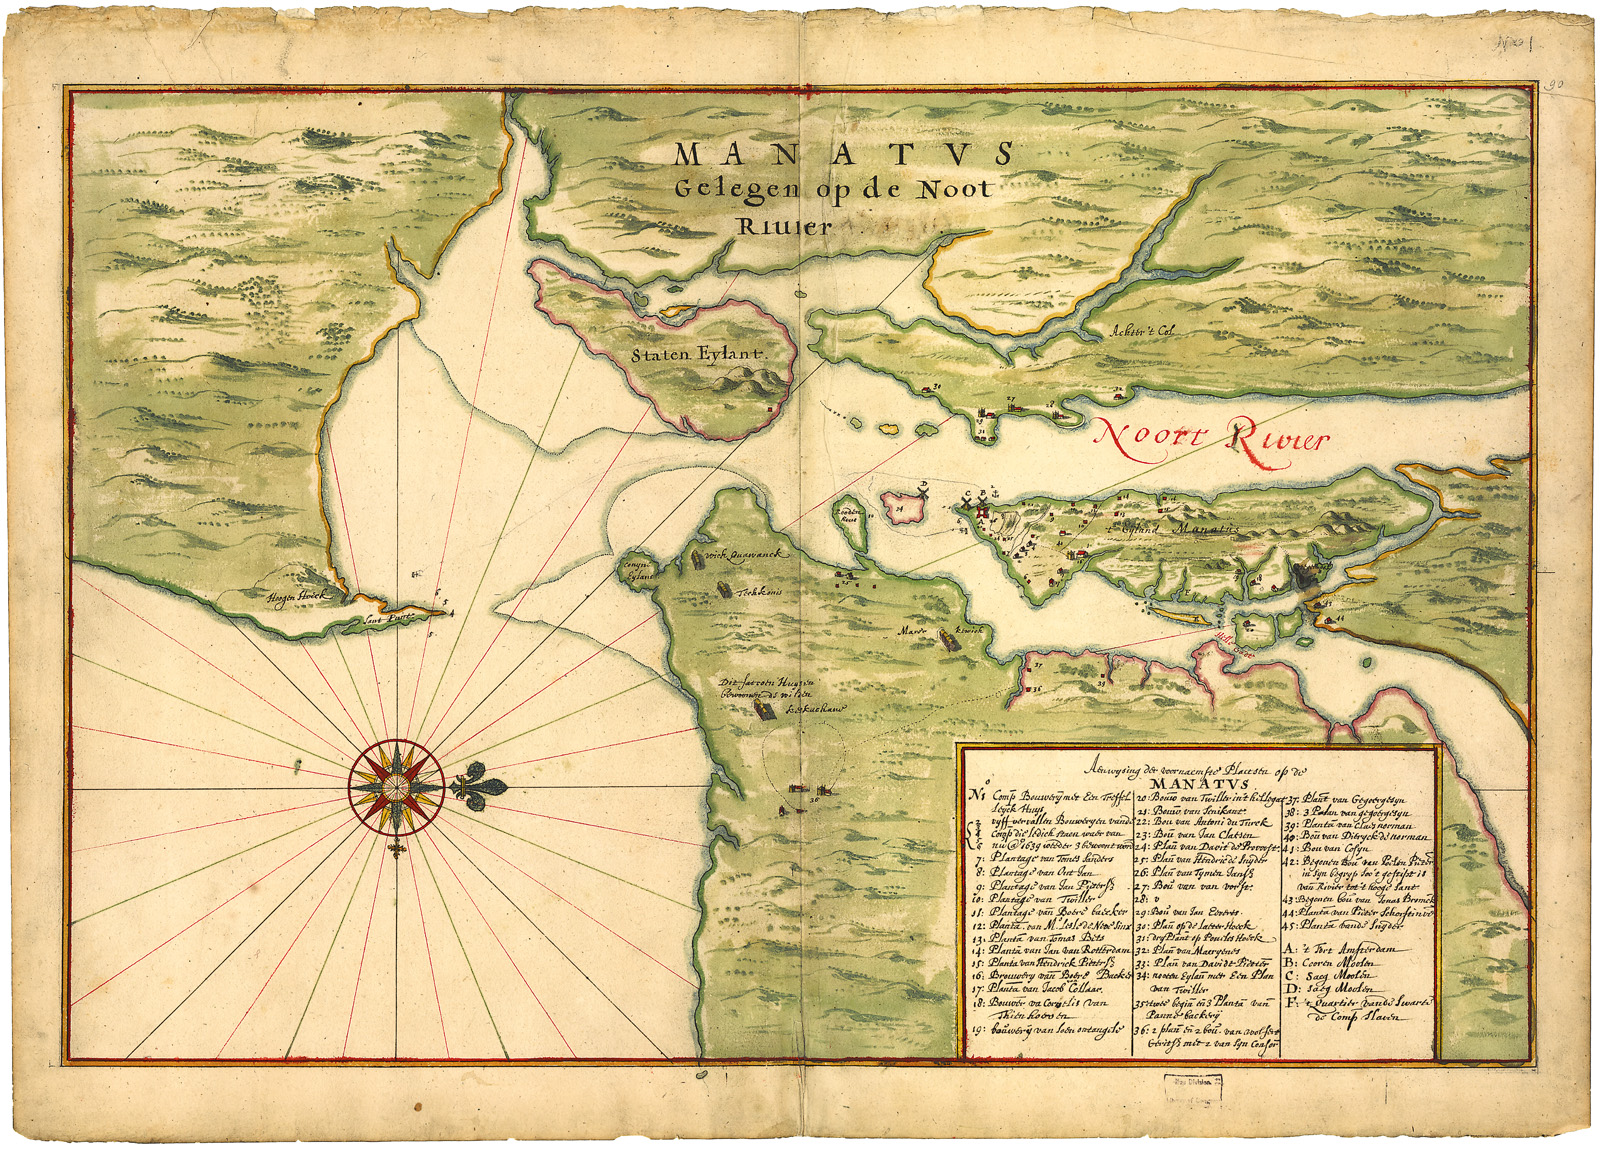 When this map was drawn in 1639, the Dutch colony of New Netherland was 15 years old. The bouwerie (farm) belonging to “Antony du Turck”—Anthony the Turk, as the map’s key lists his name—is marked among some three dozen others at the tip of Manhattan, which is here named Eyland Manatus. It was in this same year van Salee’s conflicts boiled over into a court-ordered expulsion from Eyland Manatus across the river to Bruekelen. This map orients with north to the right, and in addition to Manhattan, it shows the Hudson and East rivers flowing south into Long Island Sound, New Jersey at its top with Staten Island and today’s Brooklyn, Queens and the Bronx to the lower right.